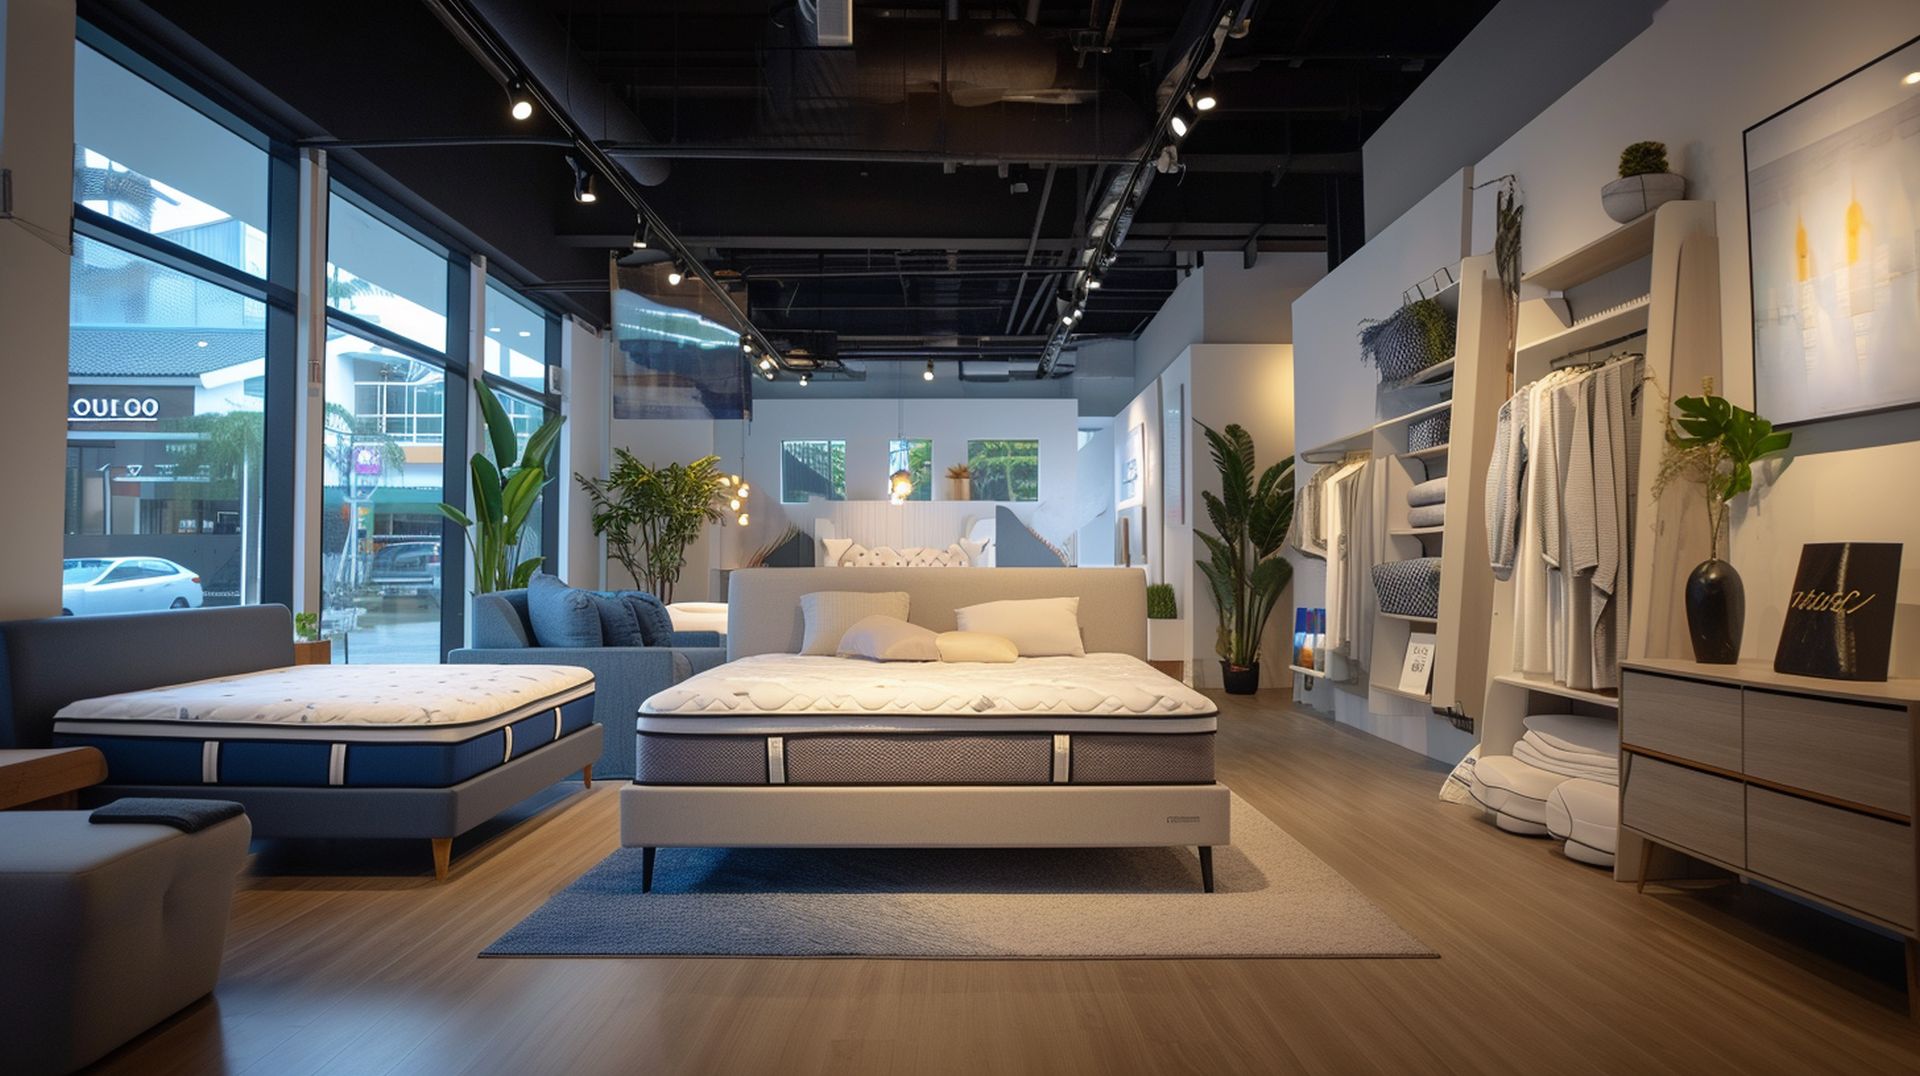 If you're looking for a new bed, mattress stores in Phoenix offer the best customer and delivery service, financing, and warranties in Arizona